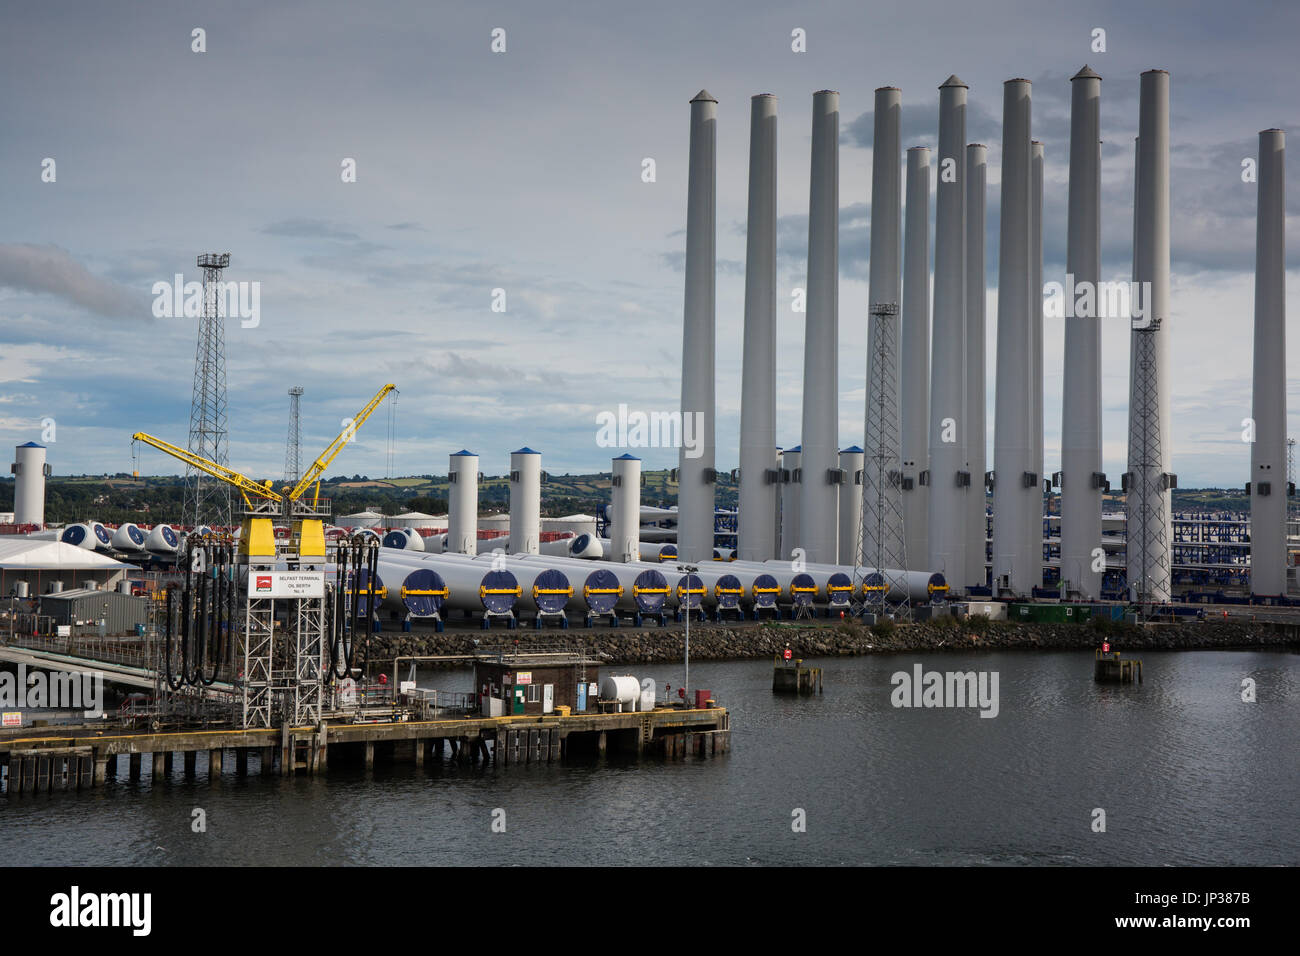 Floating wind farm parts at Belfast dock awaiting shipping and assembly. Stock Photo